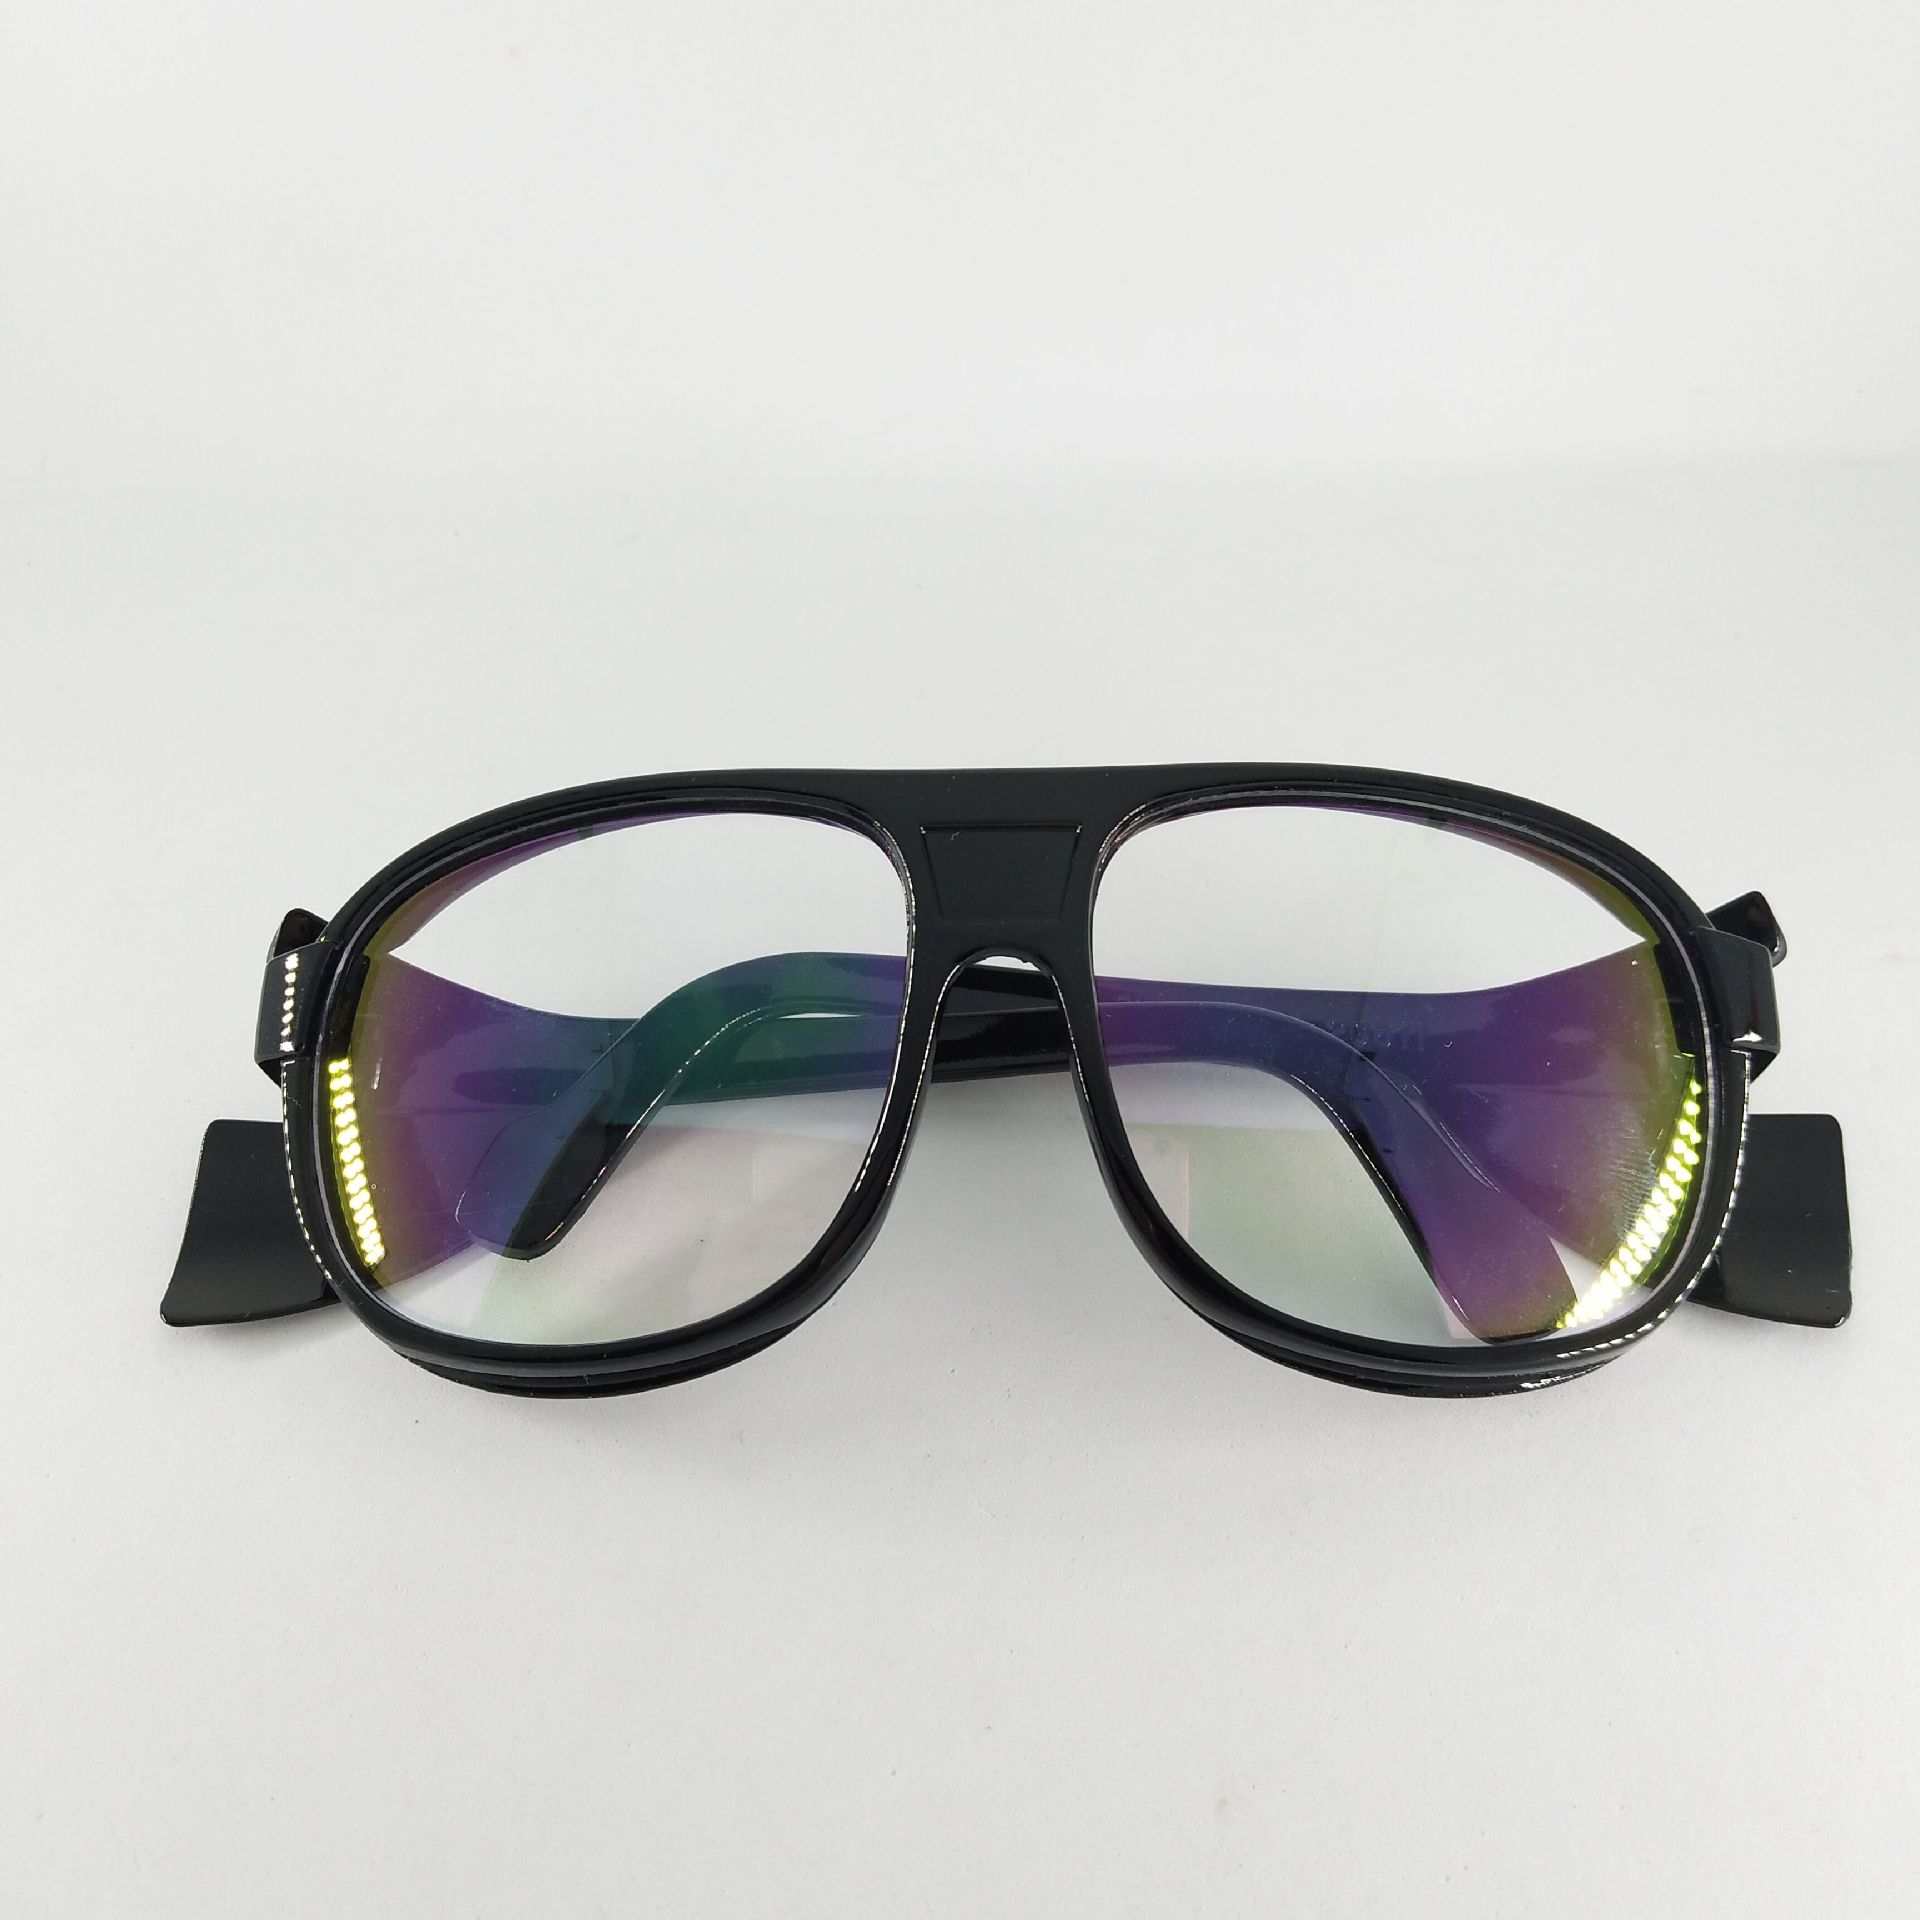 20511 Goggles Goggles To attack ultraviolet-proof Welding slag glasses Multicolor spectacles frame LA wholesale